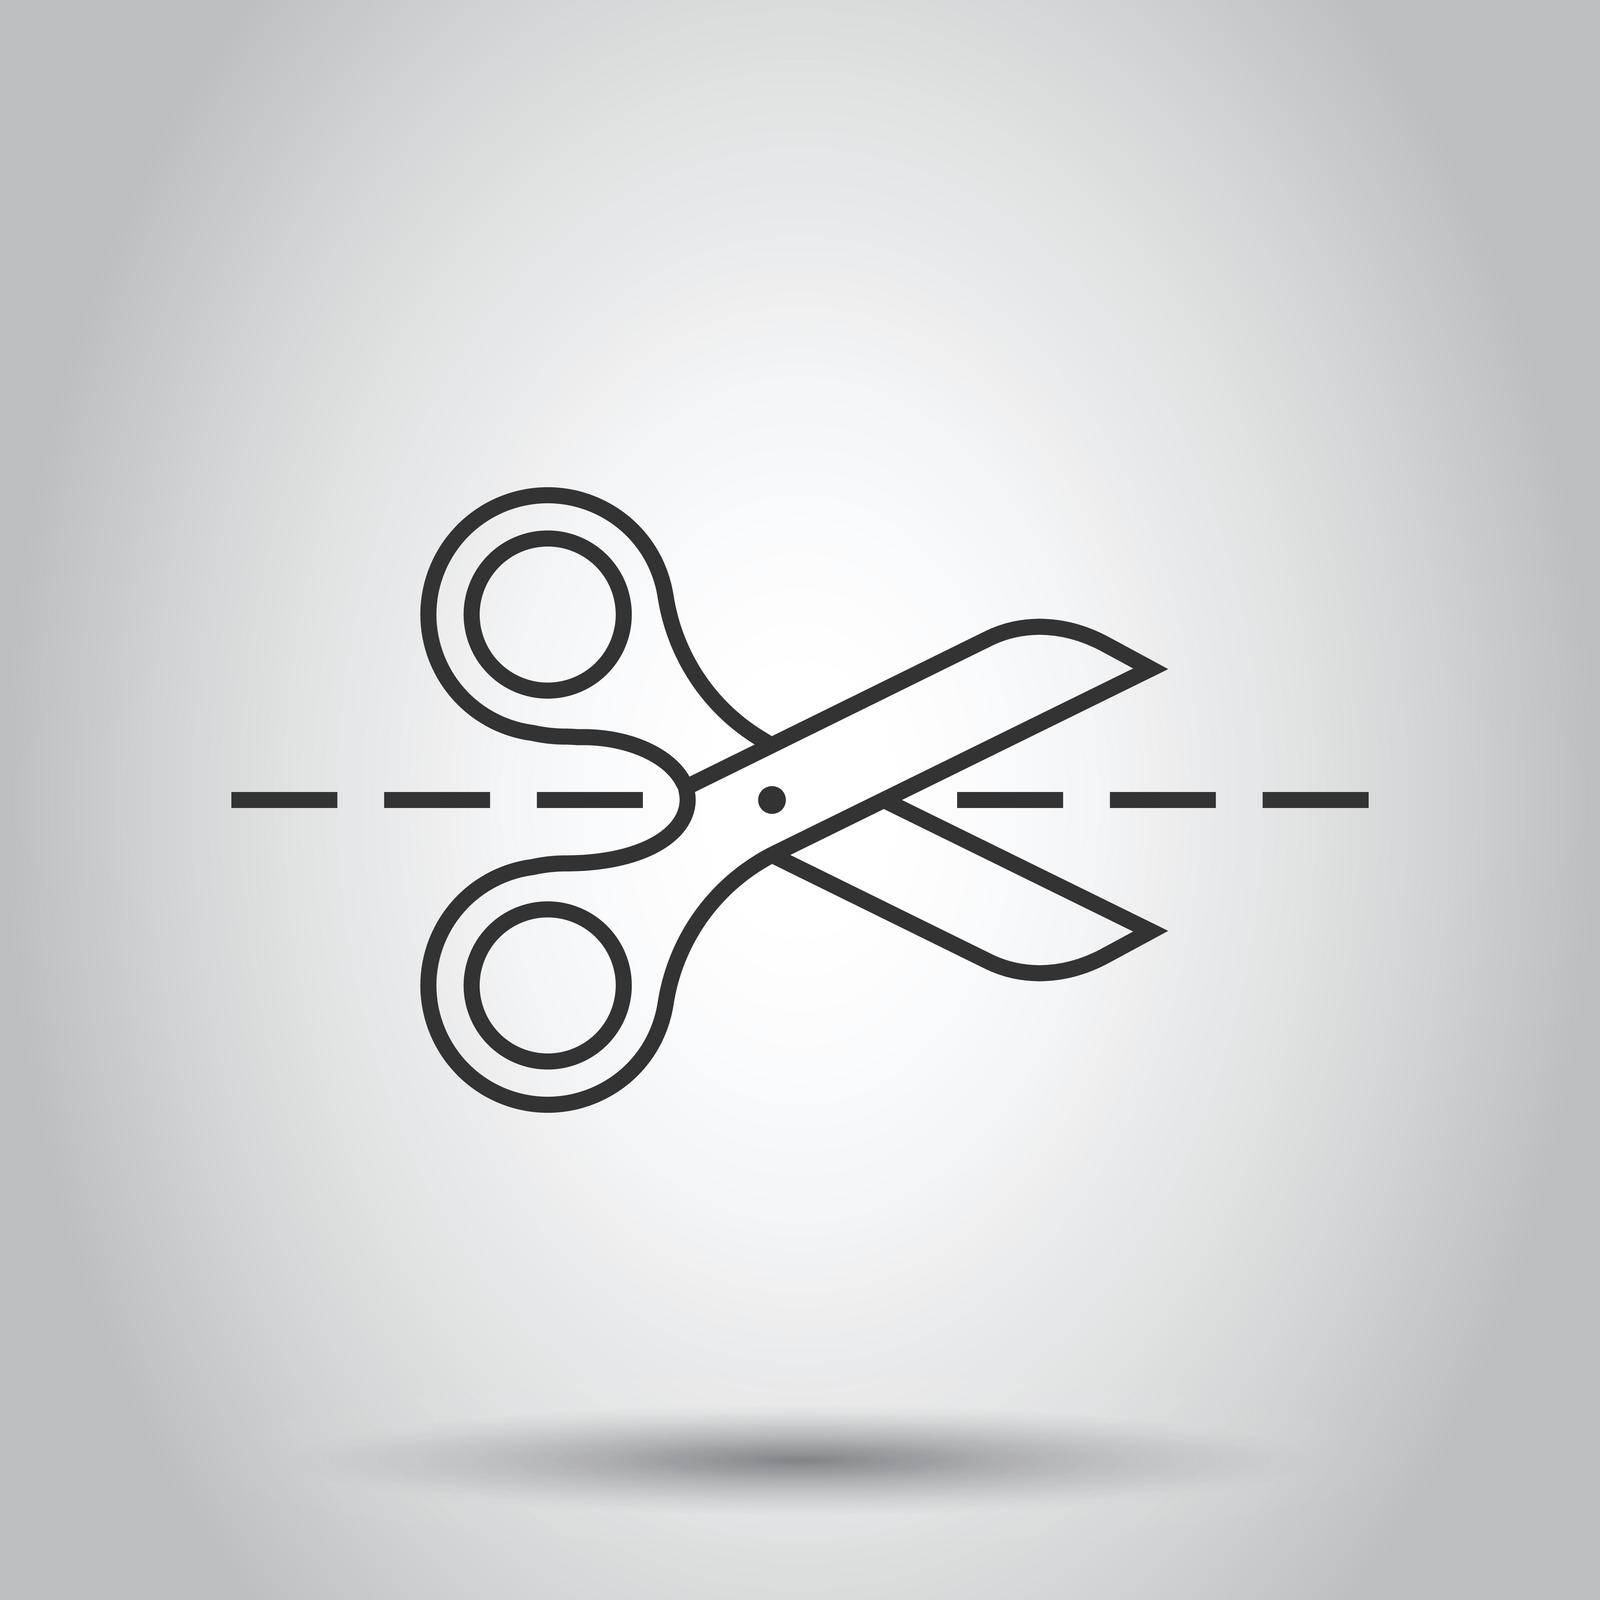 Scissor with cutting line icon in flat style. Cut equipment vector illustration on white isolated background. Cutter business concept. by LysenkoA